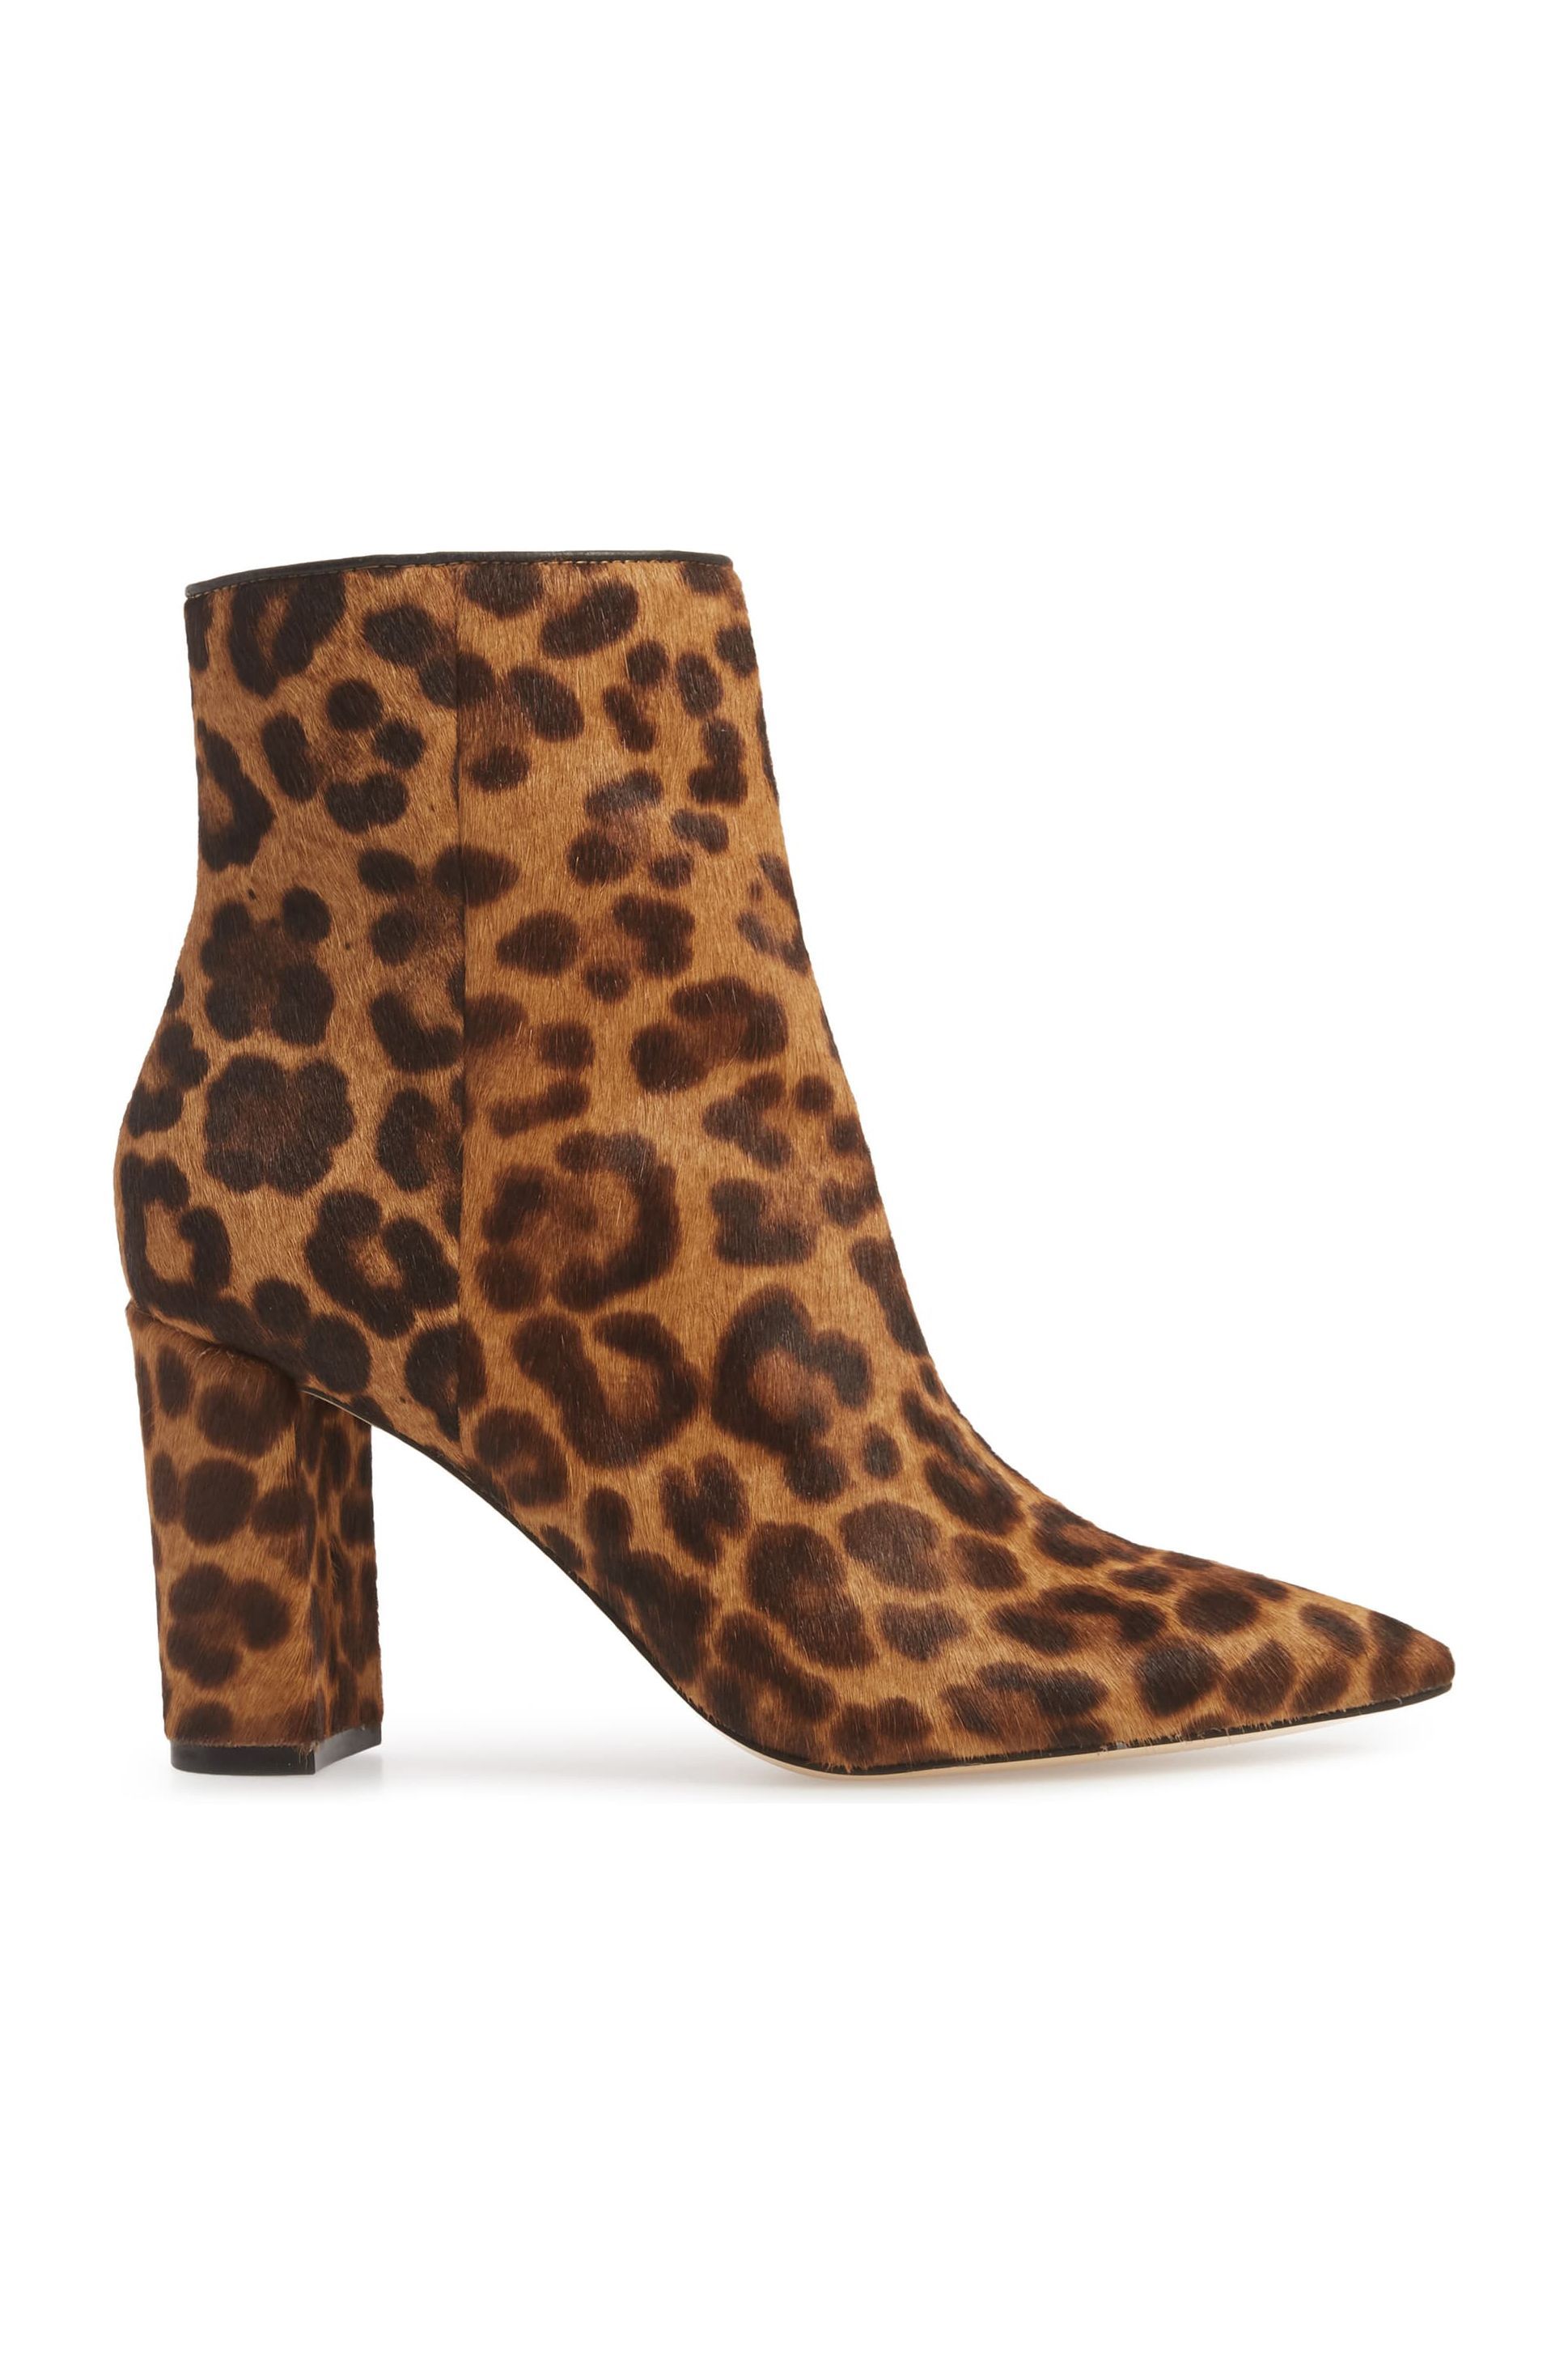 The Best Animal Print Boots of 2020 